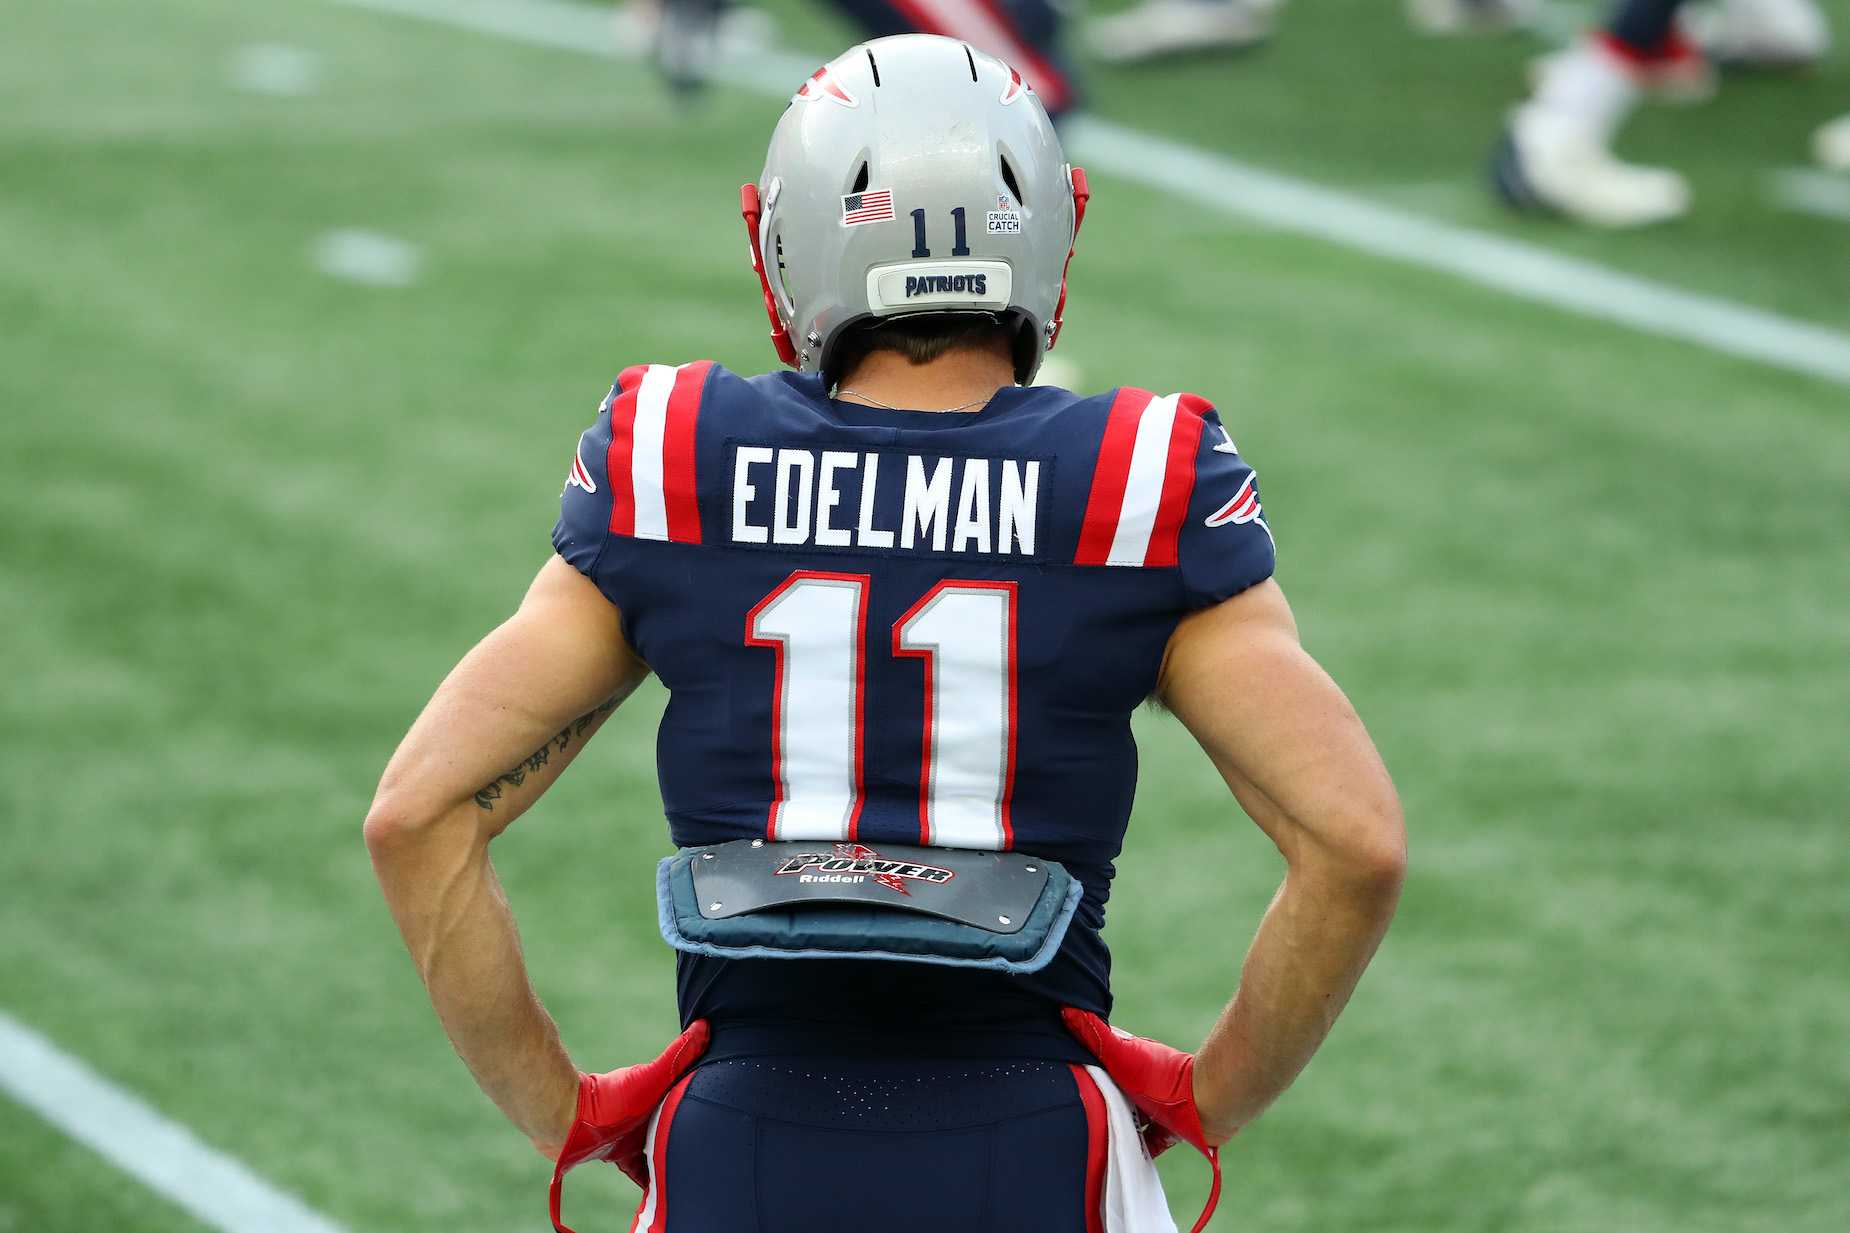 New England Patriots receiver Julian Edelman stands on the football field during his final NFL season